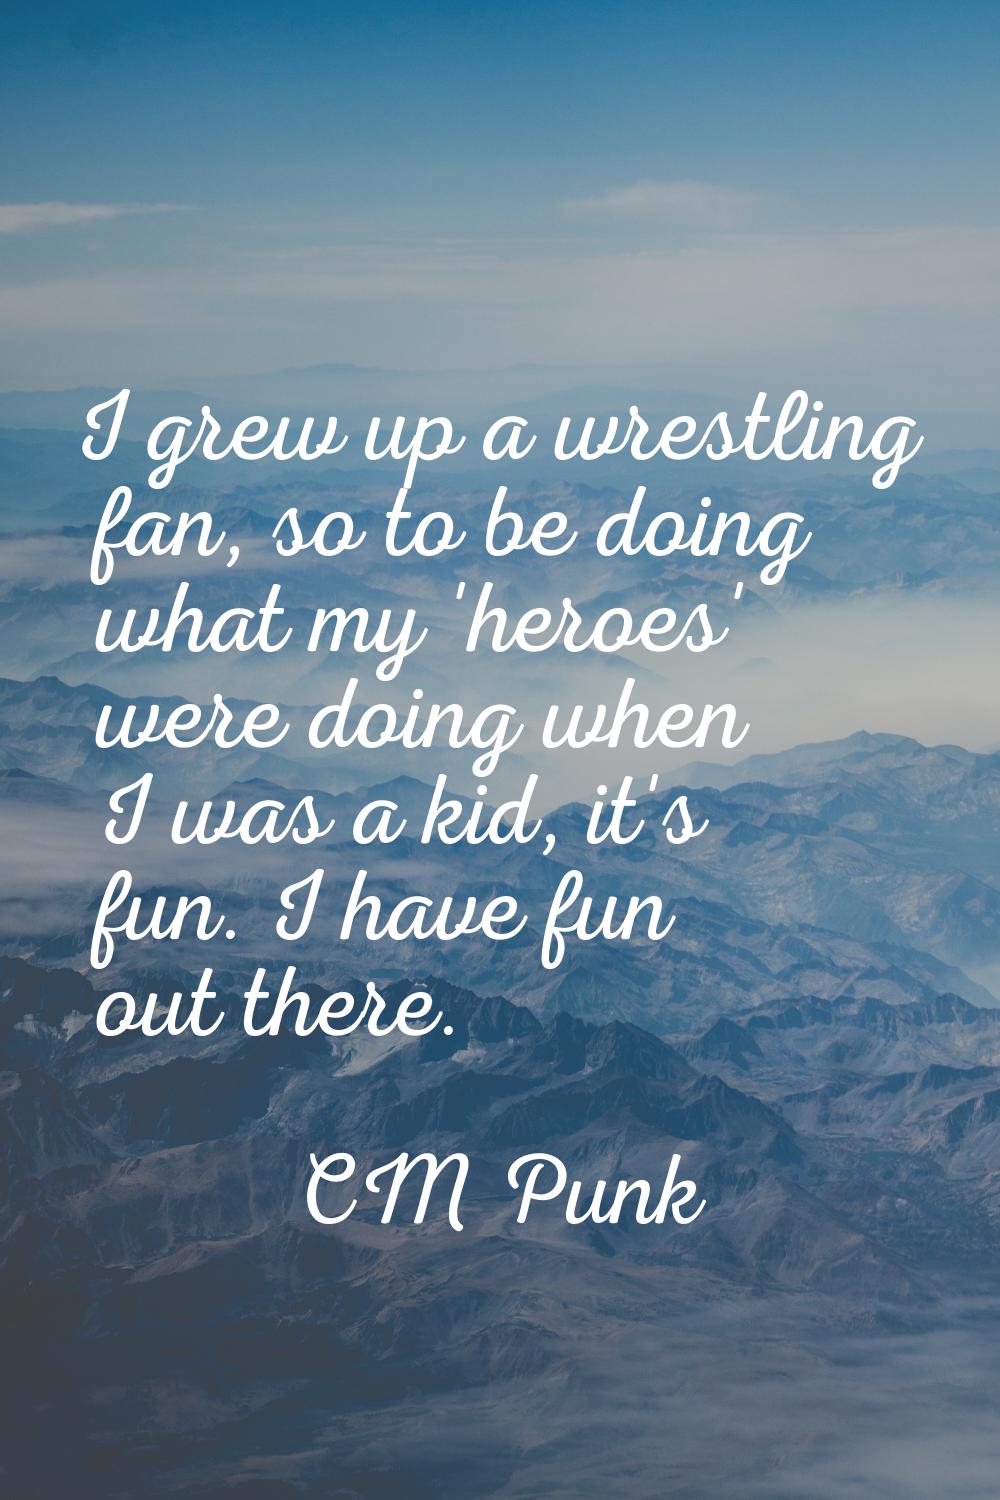 I grew up a wrestling fan, so to be doing what my 'heroes' were doing when I was a kid, it's fun. I